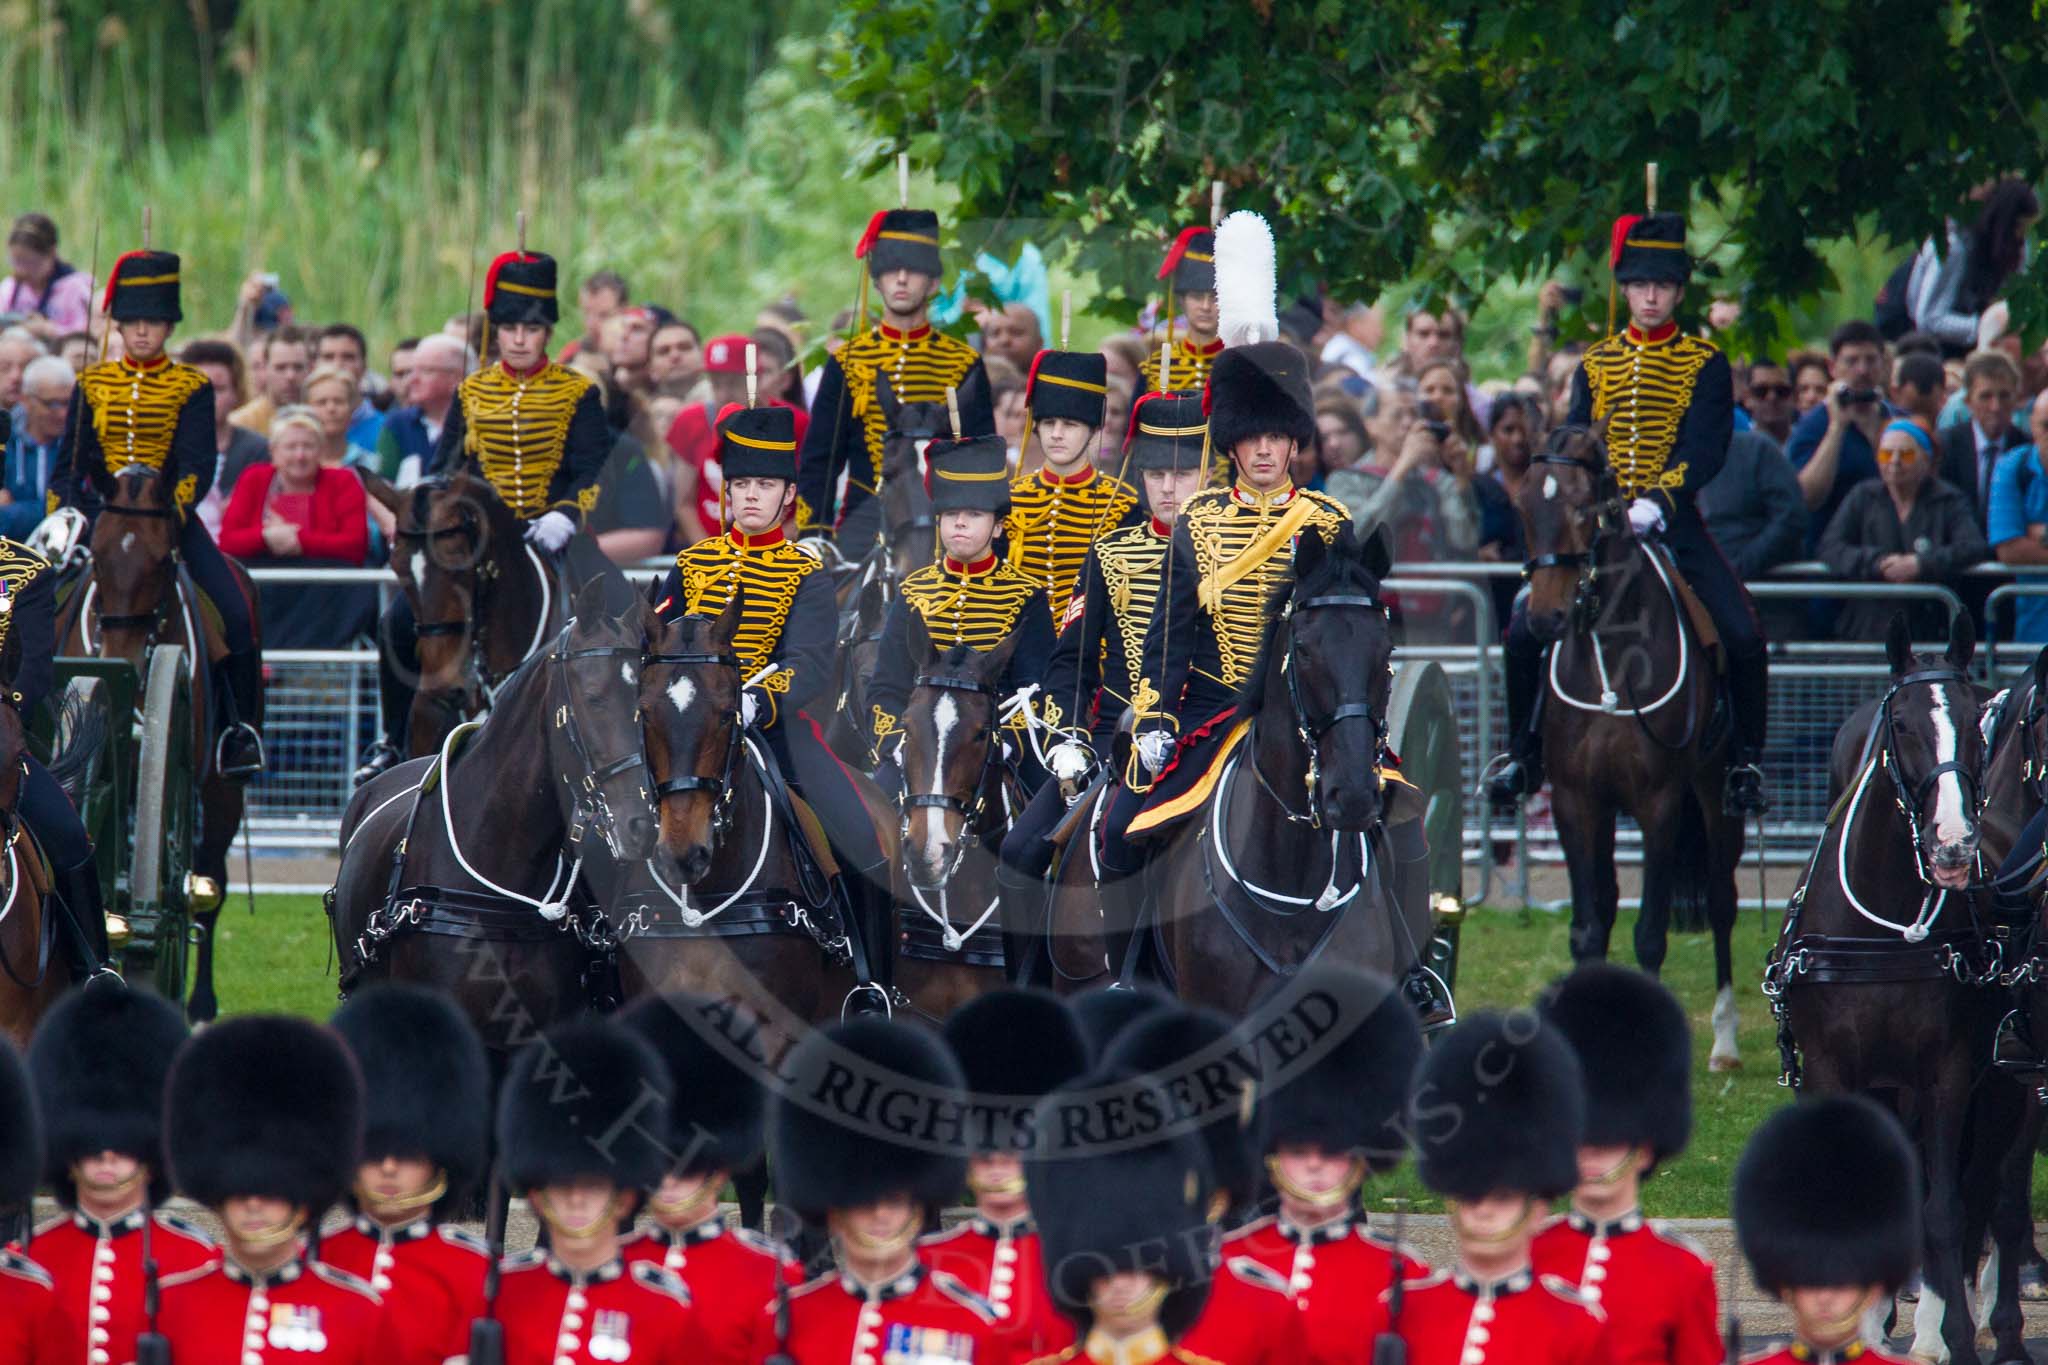 Trooping the Colour 2014.
Horse Guards Parade, Westminster,
London SW1A,

United Kingdom,
on 14 June 2014 at 10:42, image #240